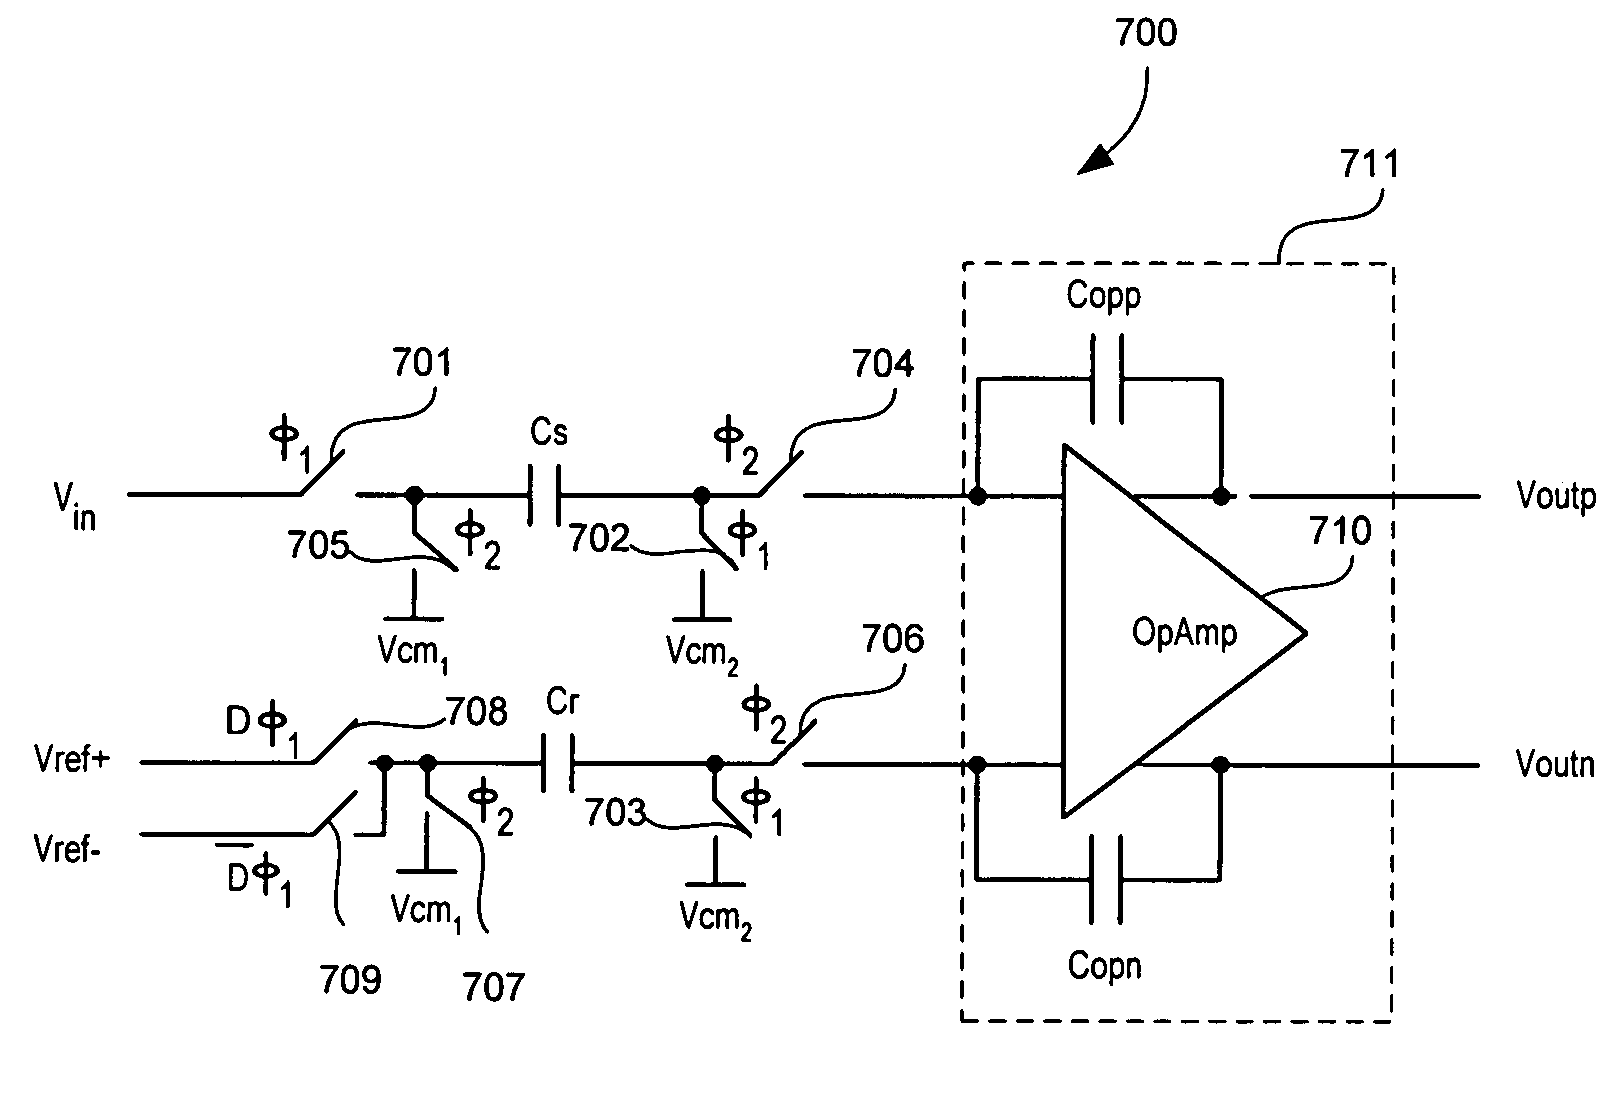 Signal processing system having an ADC delta-sigma modulator with single-ended input and feedback signal inputs